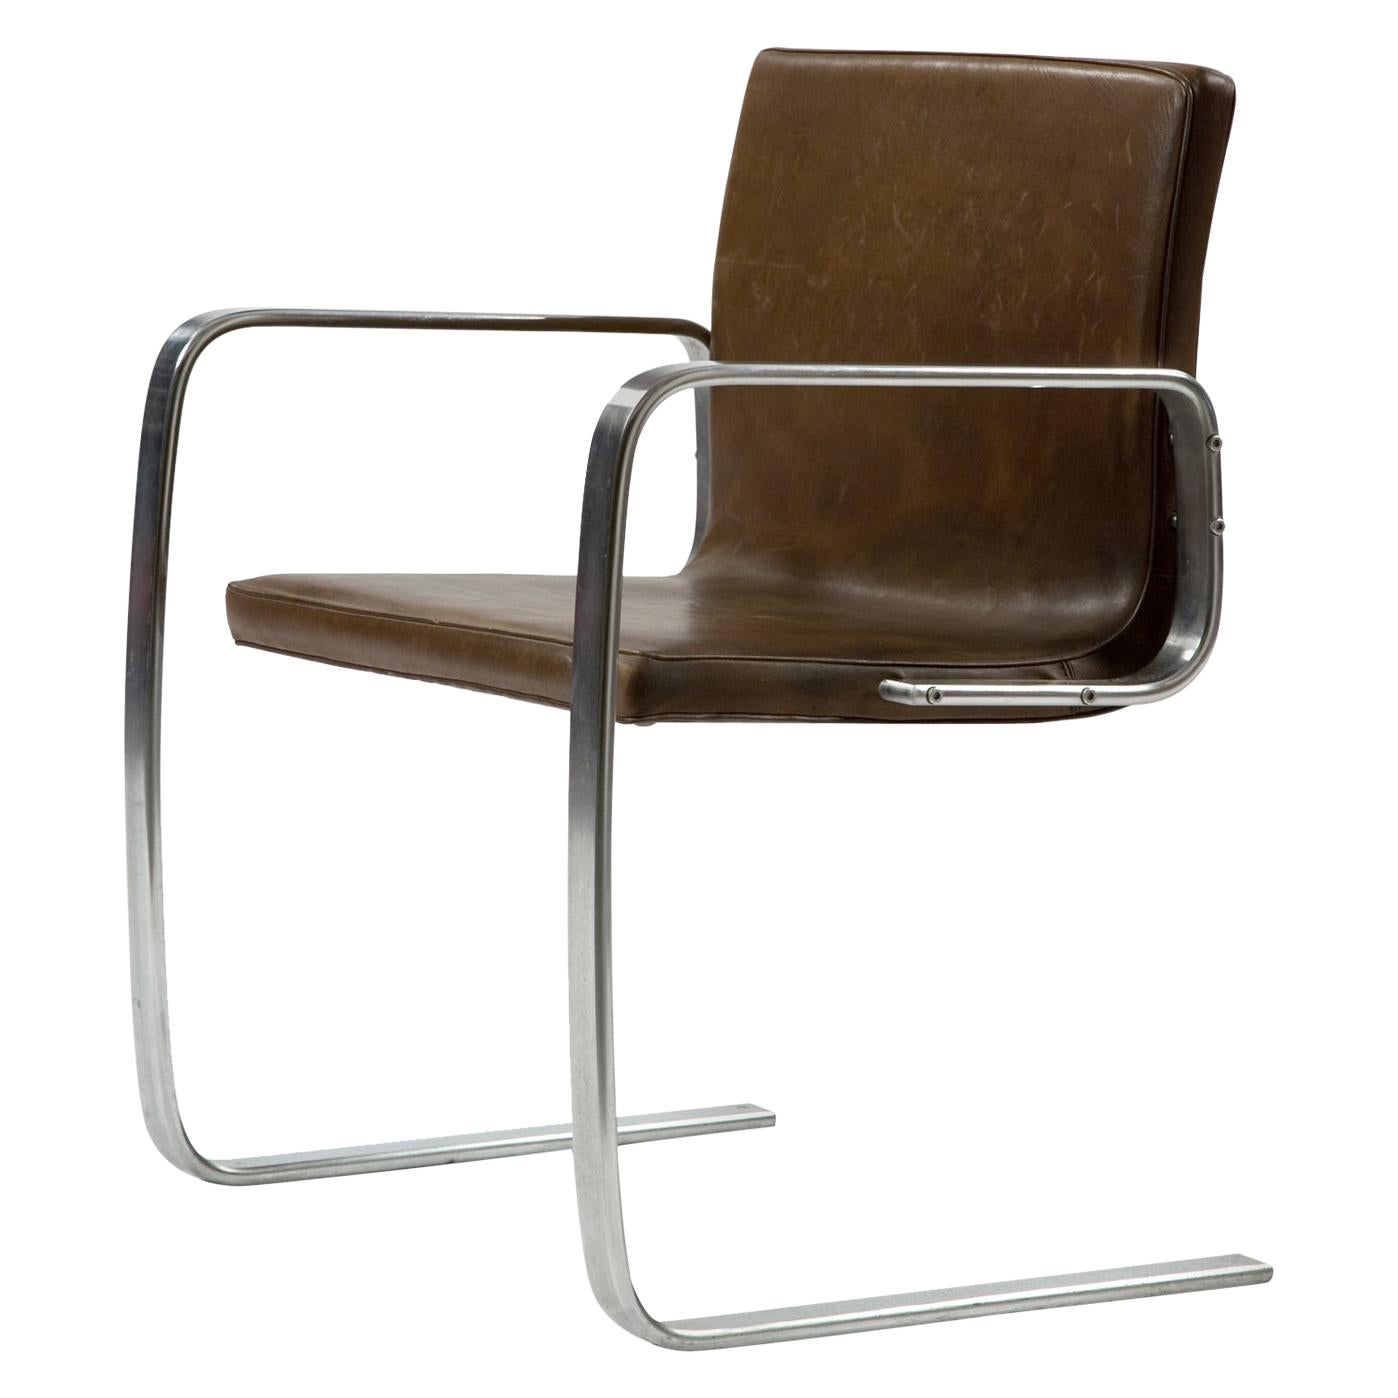 PK 13 "Free Swinger" Cantilevered Armchair by Poul Kjaerholm, circa 1974 For Sale